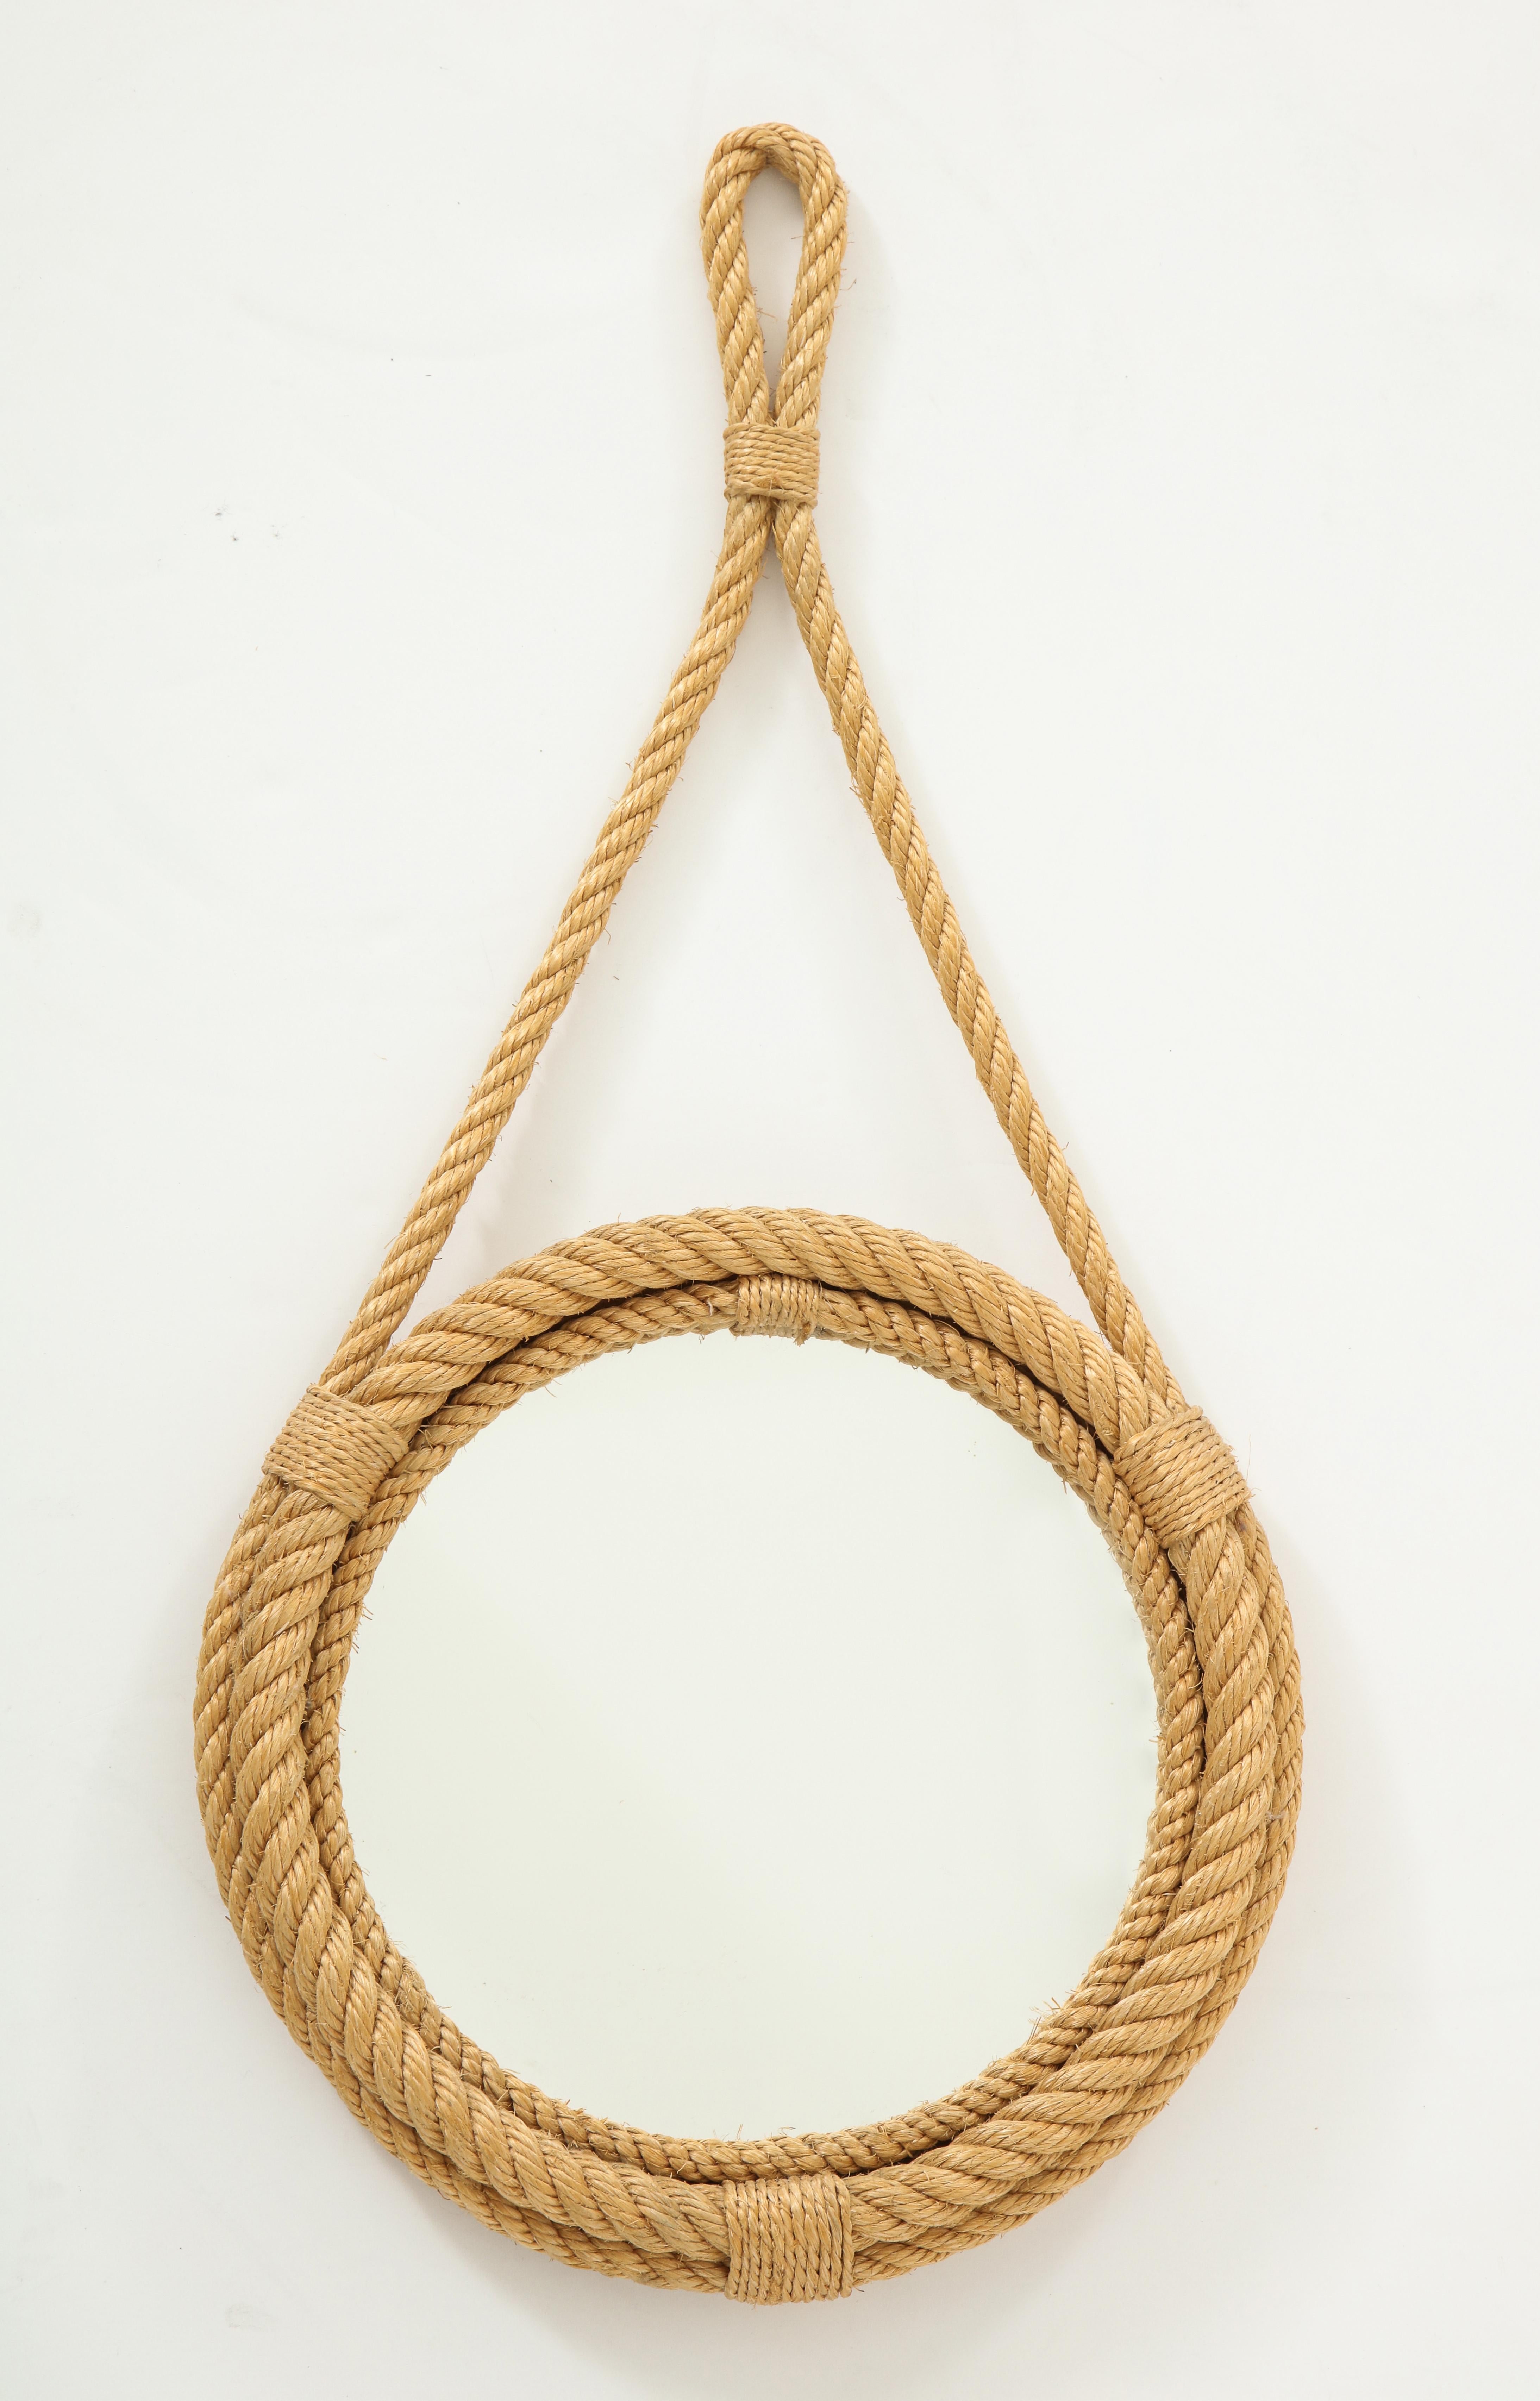 Petite Wall Rope Mirror by Audoux Minnet, France, 1960s For Sale 1